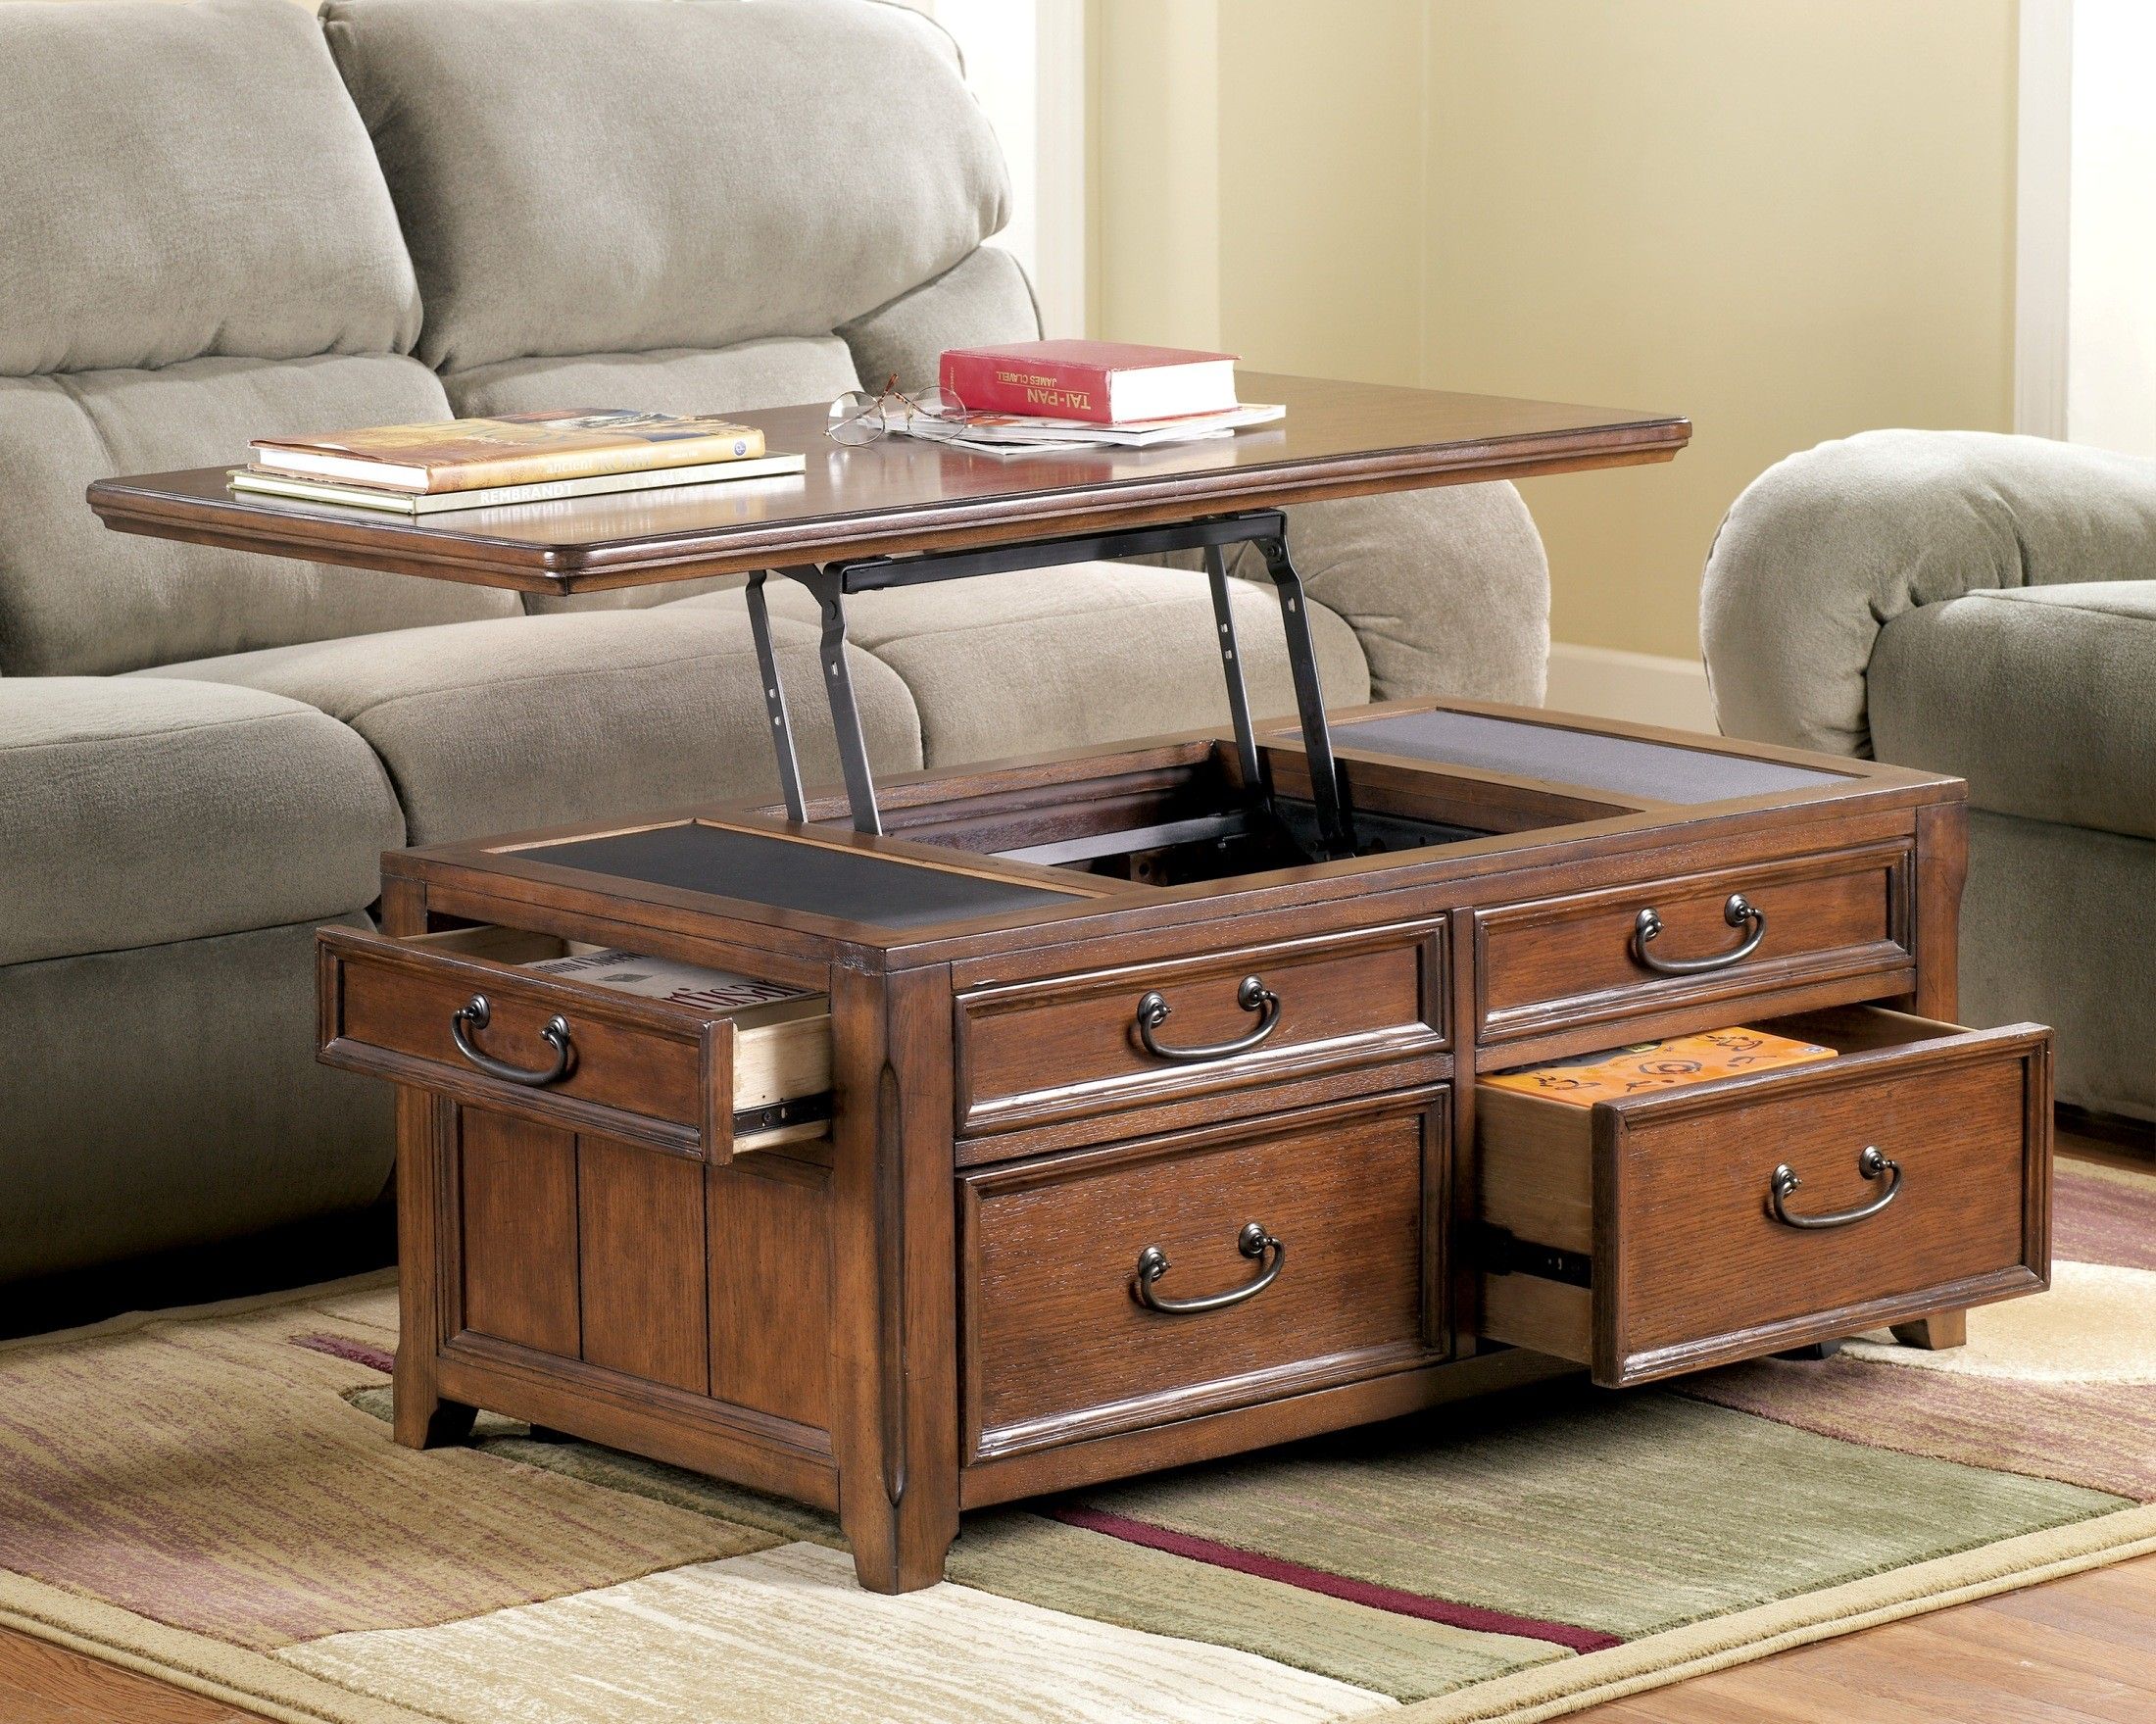 Woodboro Rectangular Lift Top Cocktail Table From Ashley (t478 20 Pertaining To Lift Top Coffee Tables With Storage (Gallery 18 of 20)